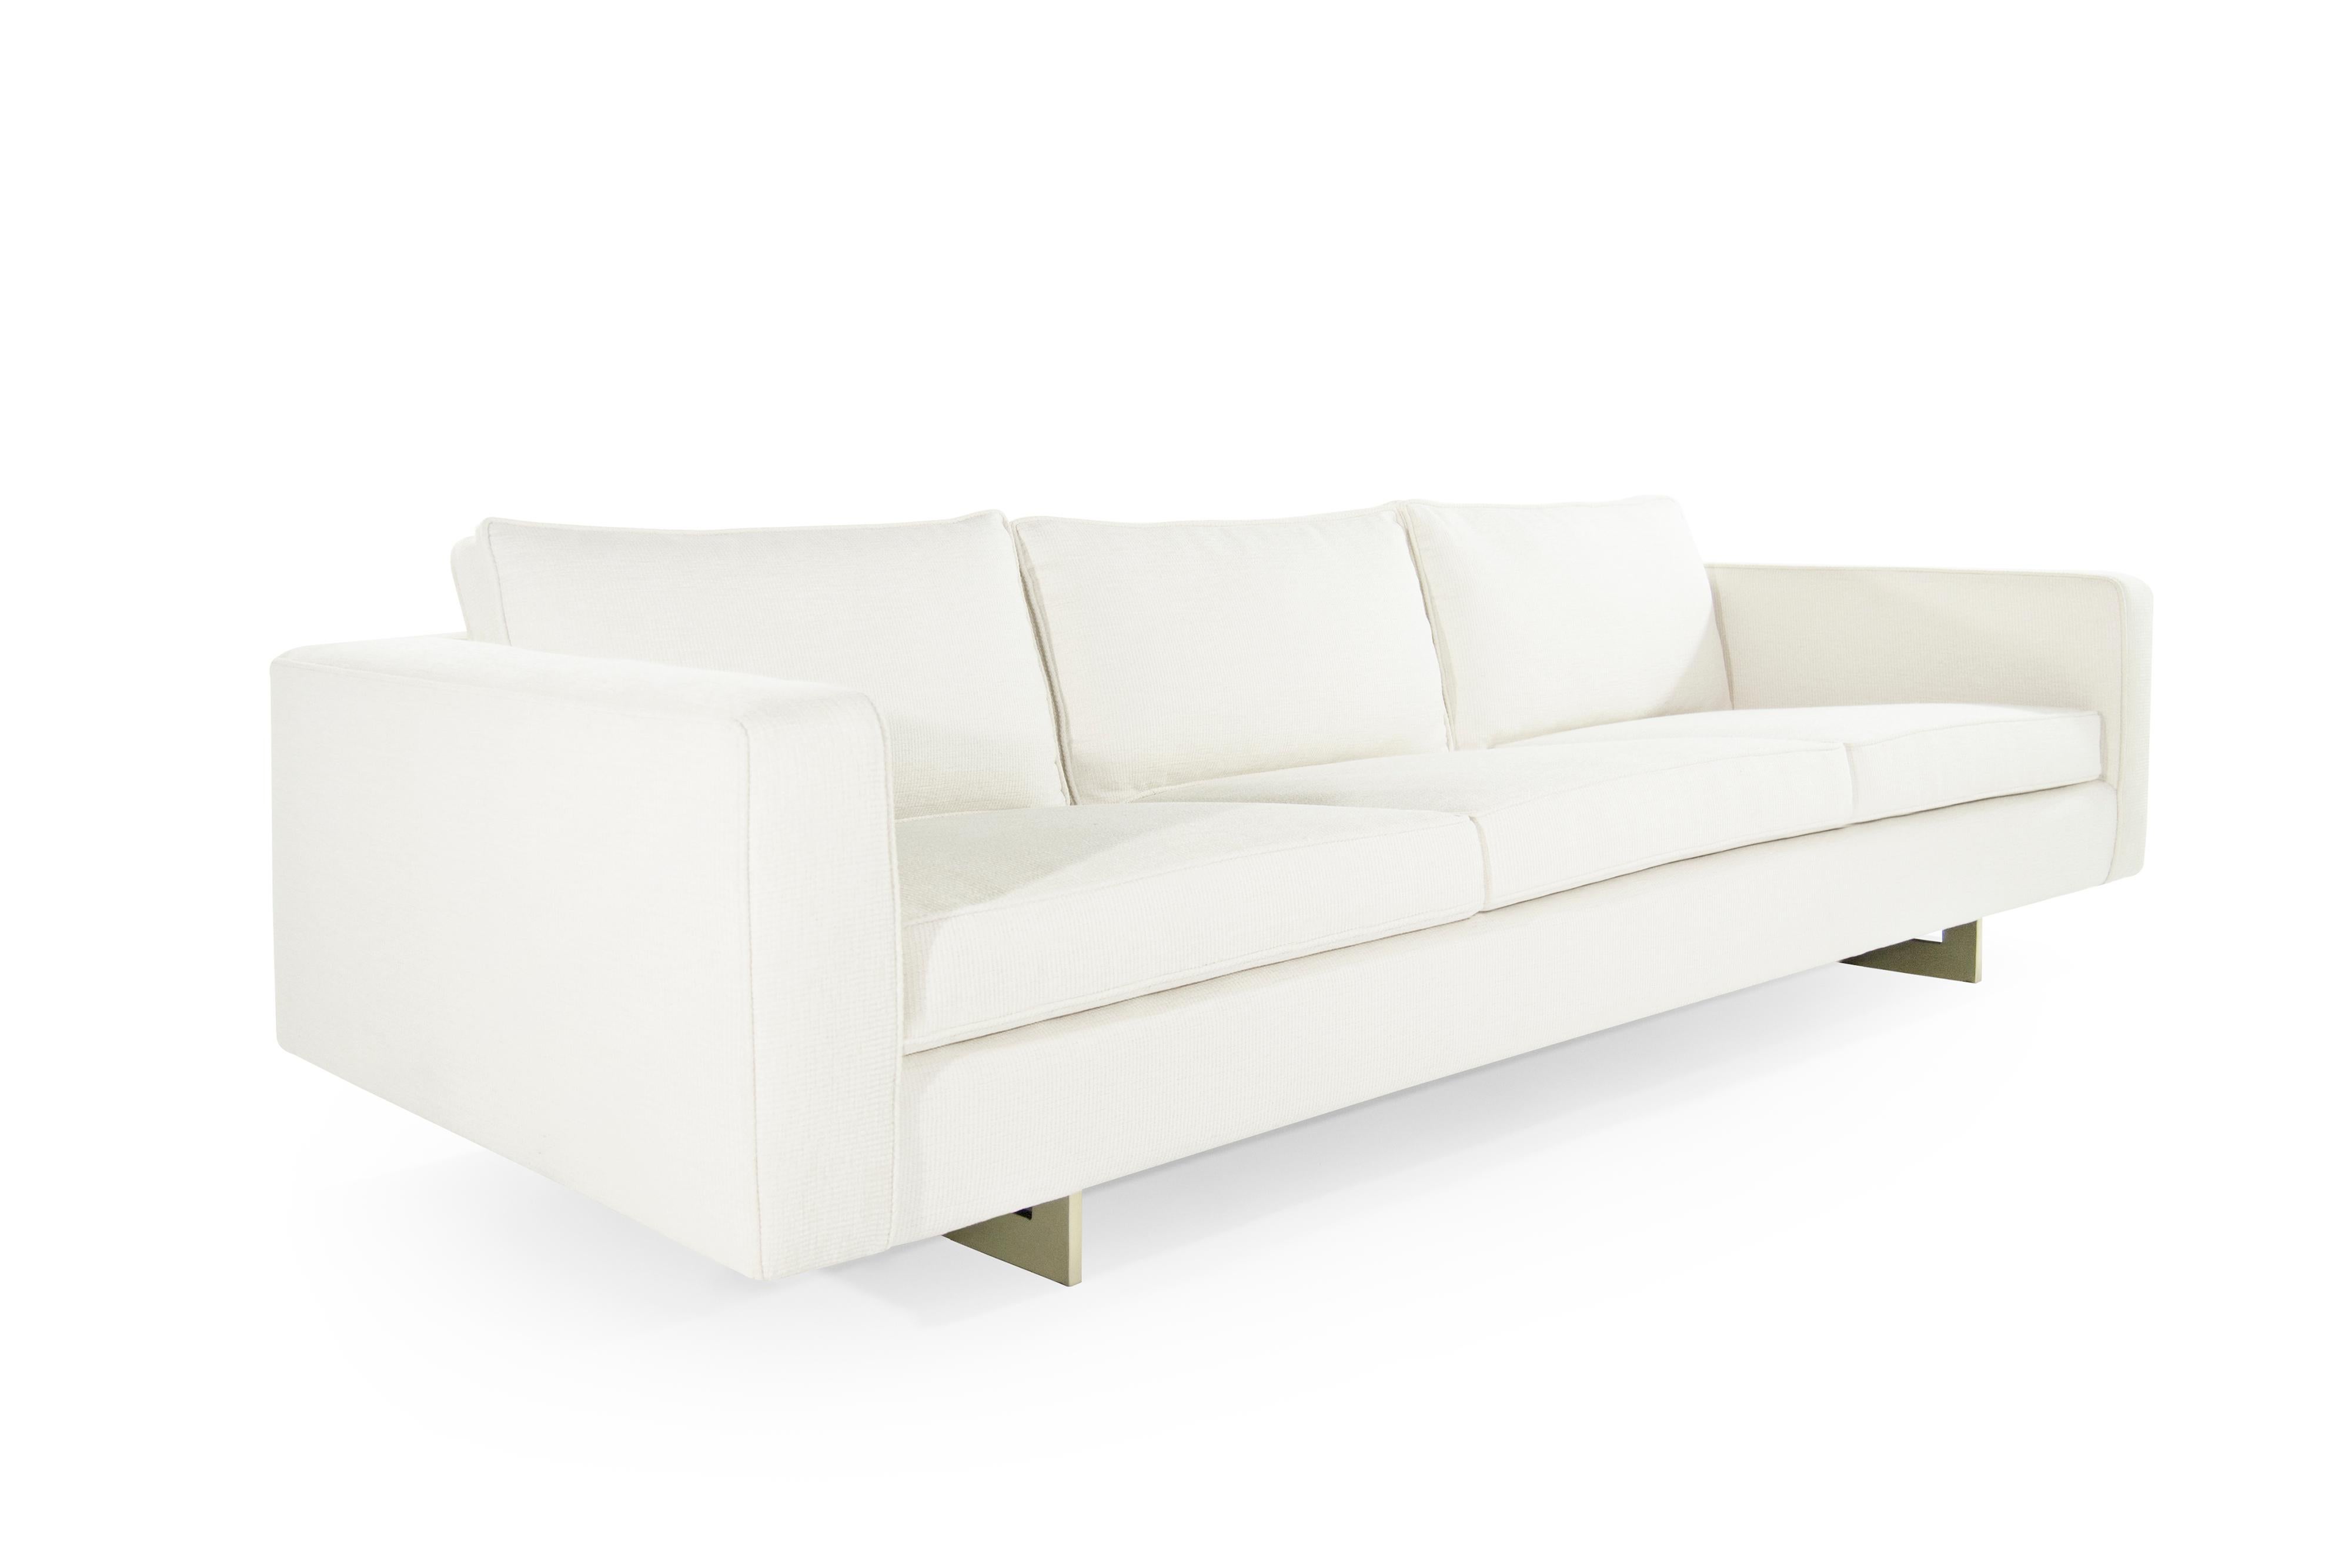 One of Jens Risom's most sought after and rarest designs. Series 65 sofa and lounge chairs, dubbed 